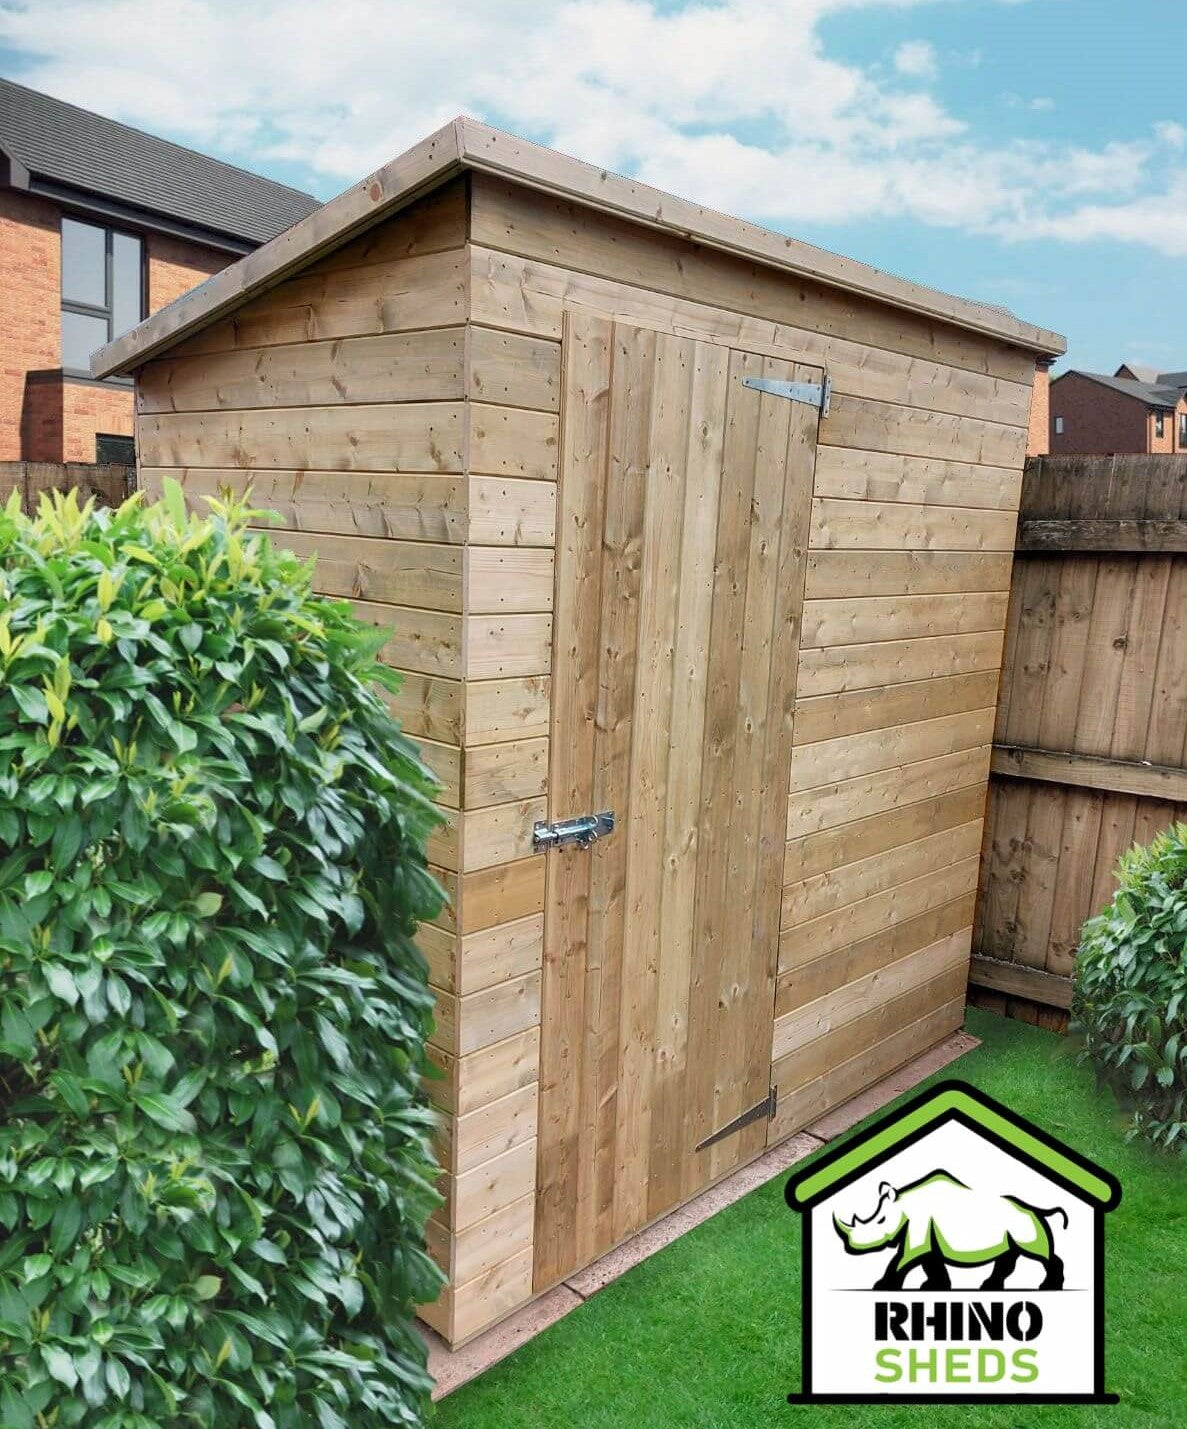 9x9 shed price